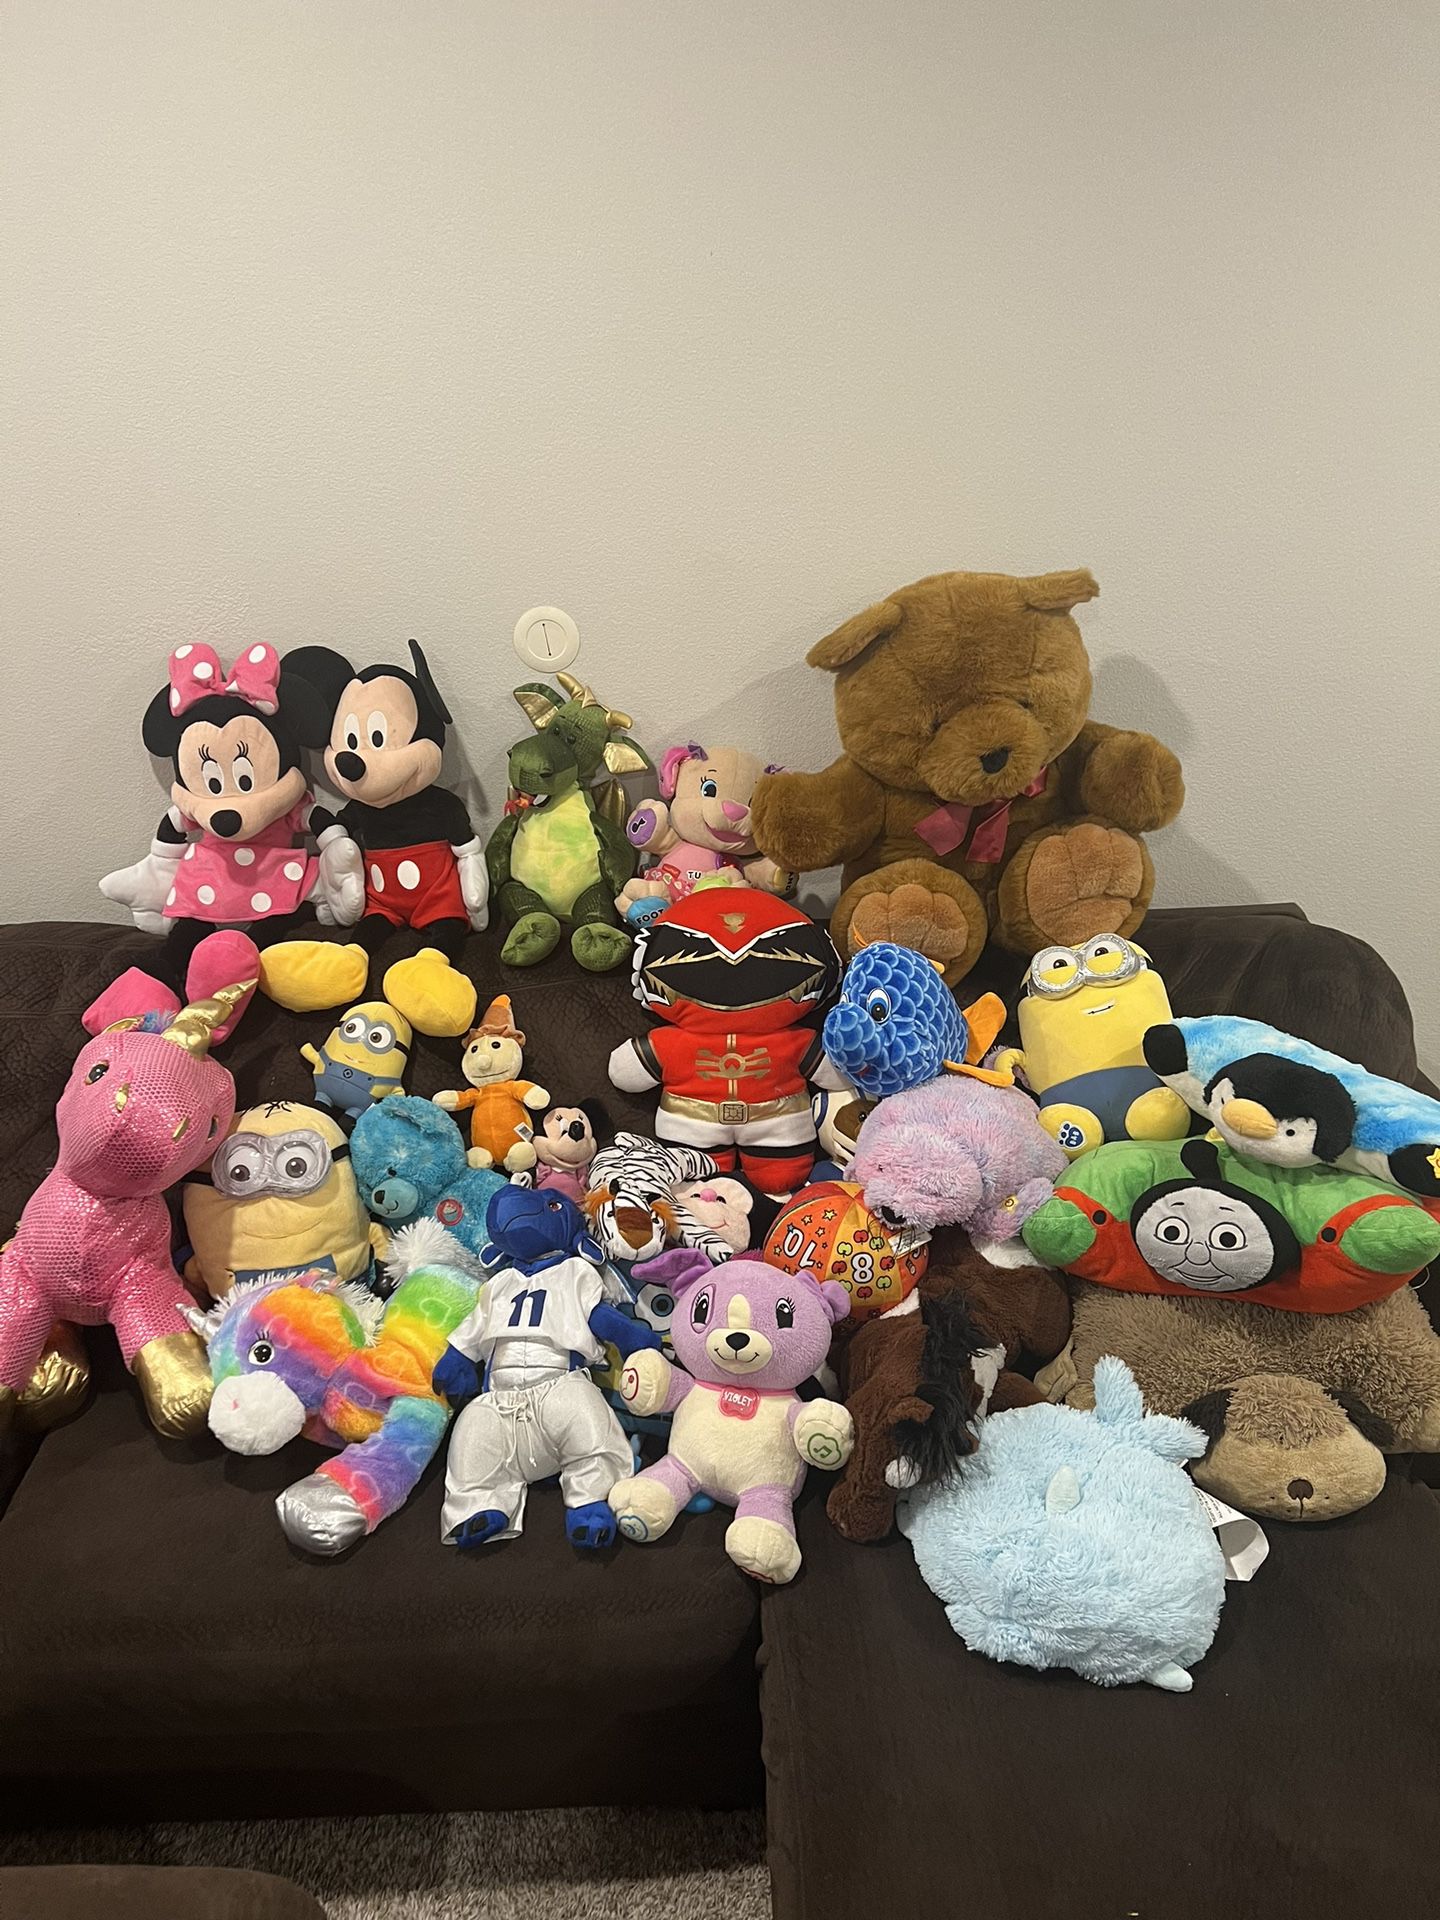 Plushies, Teddy Bears, Micky Mouse And Many More Toys